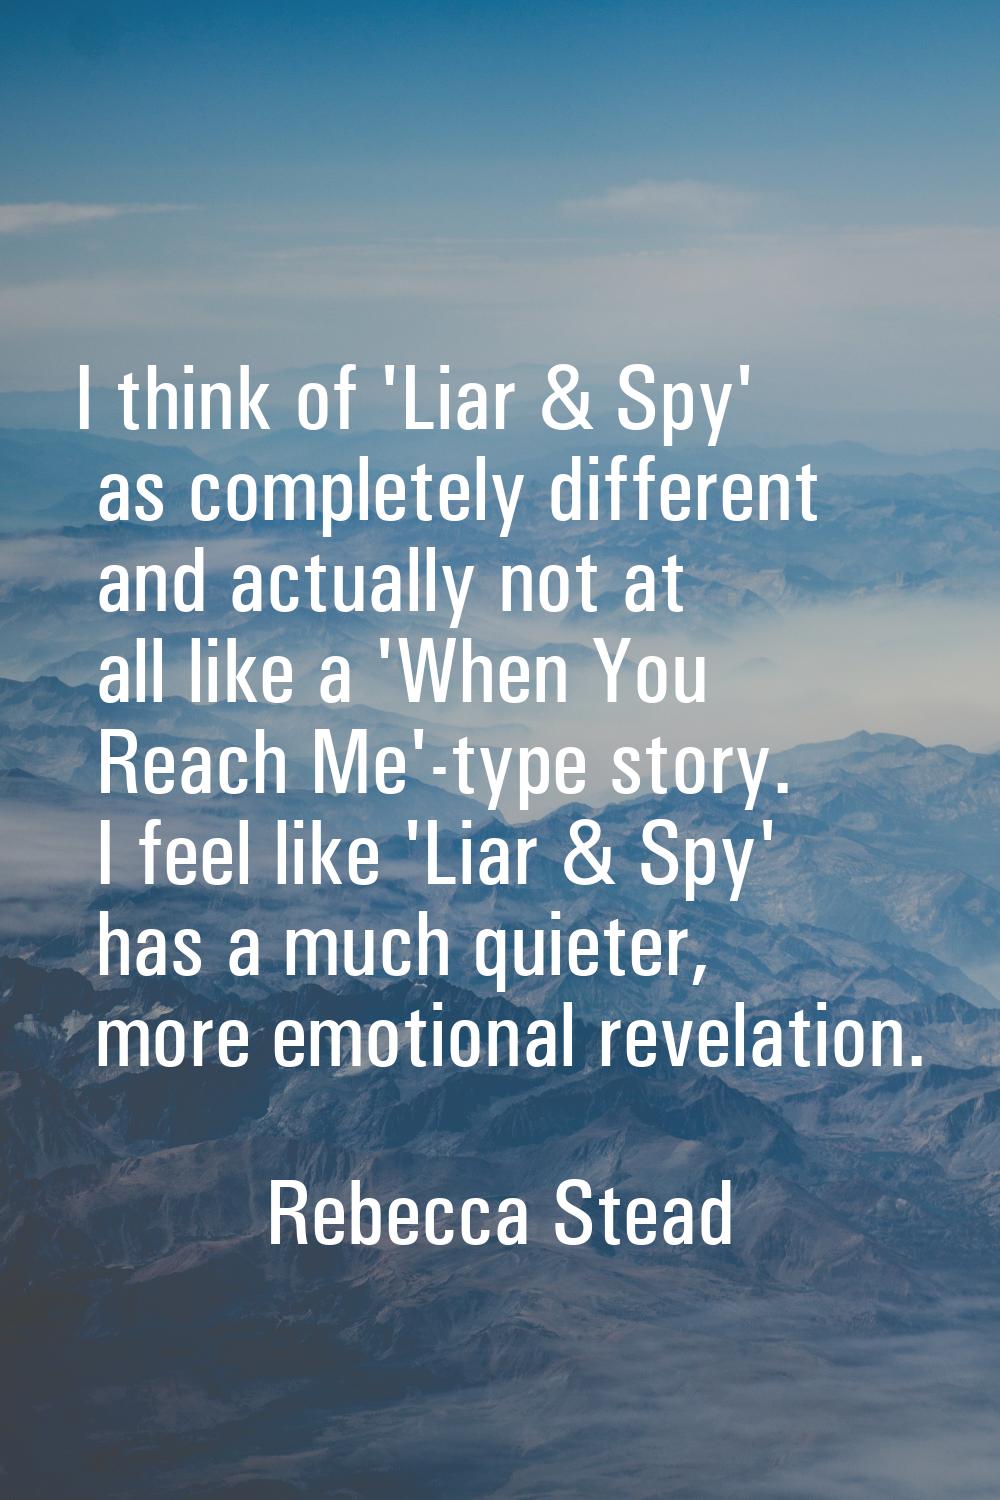 I think of 'Liar & Spy' as completely different and actually not at all like a 'When You Reach Me'-